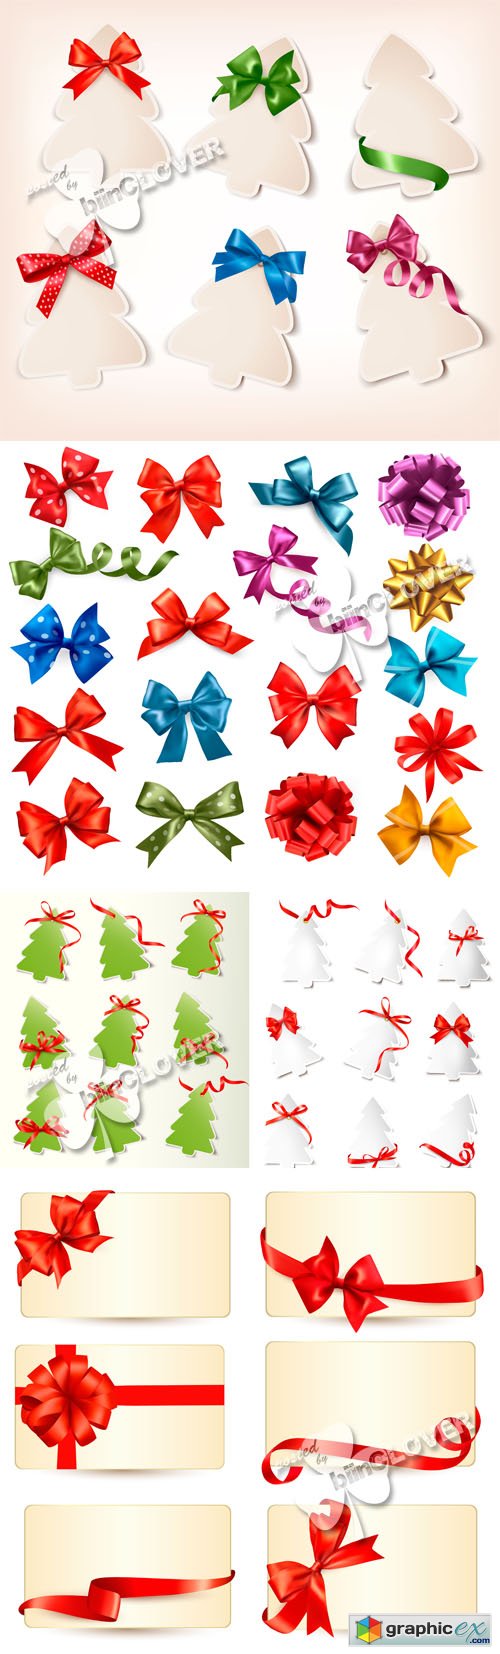 Vector Christmas gift cards with ribbons and bows 0521